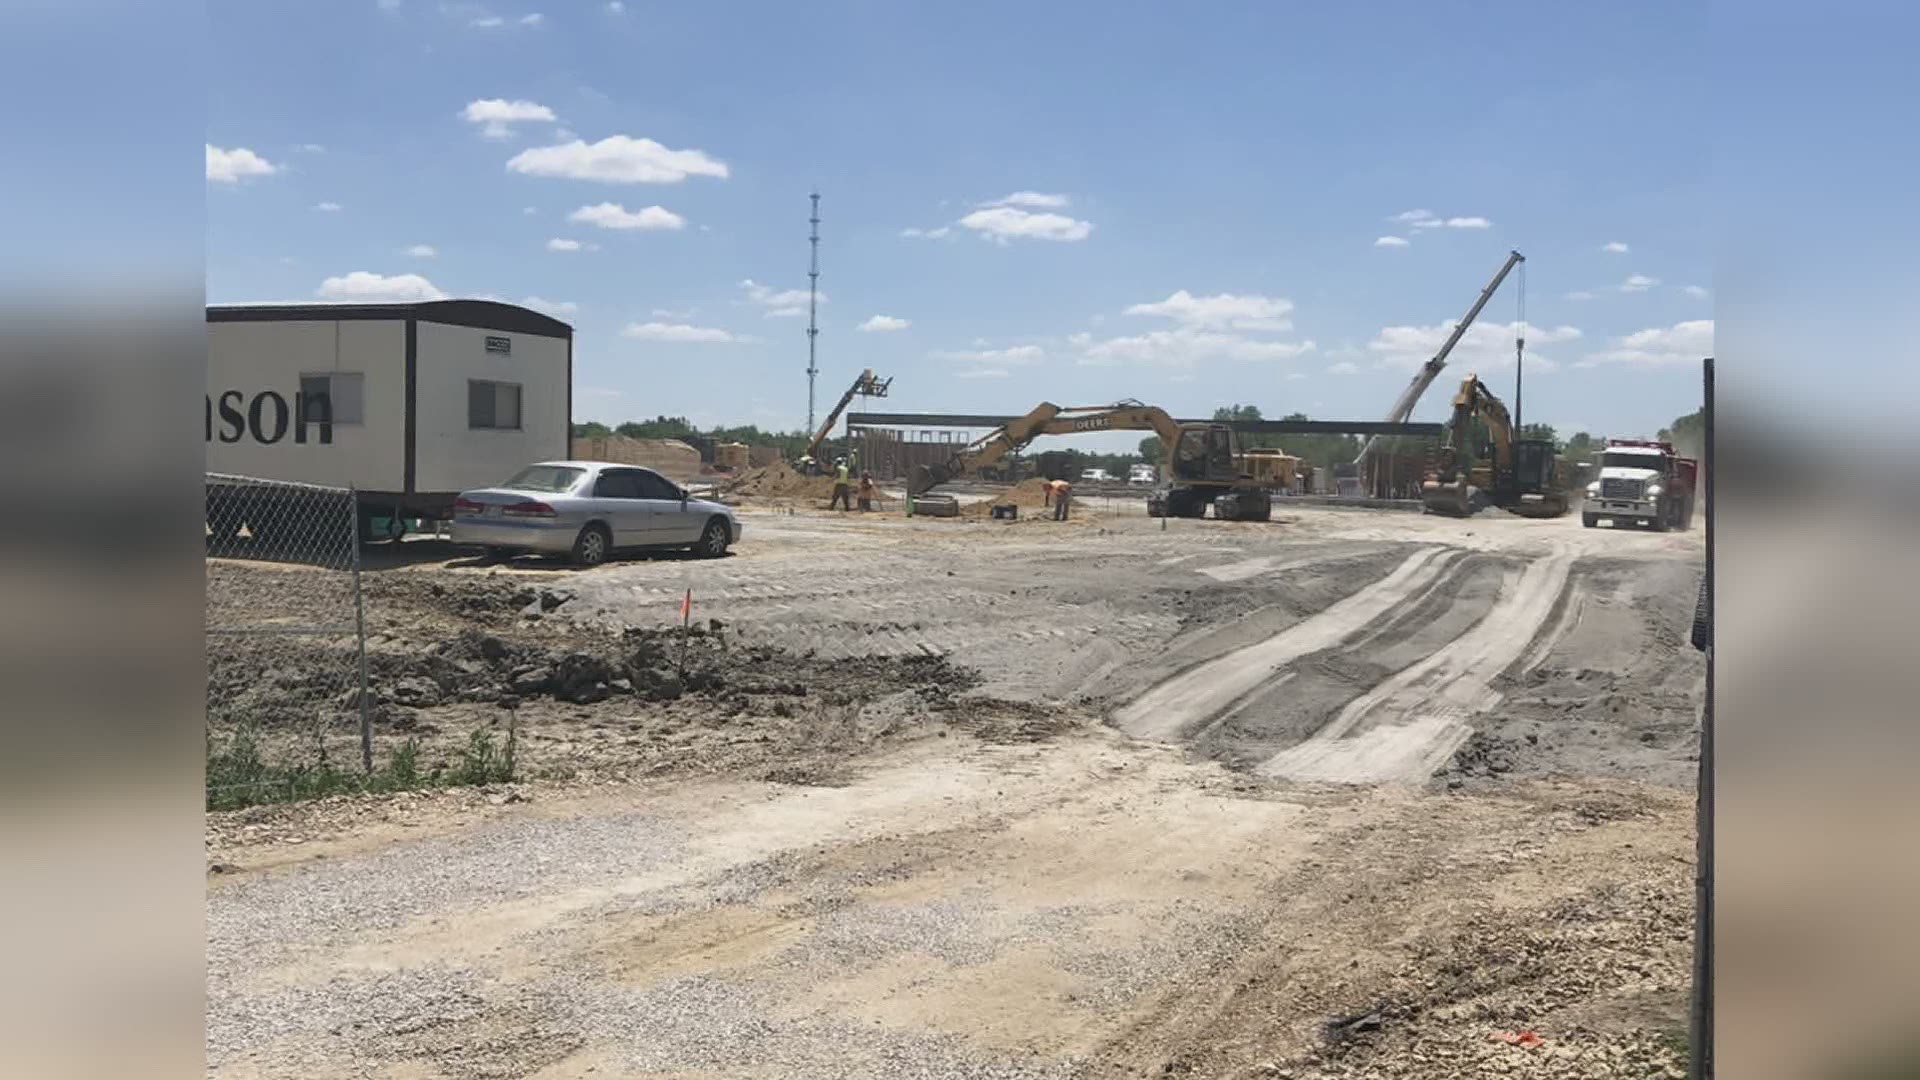 The development is being built off Highway 61 and I-280 in Scott County